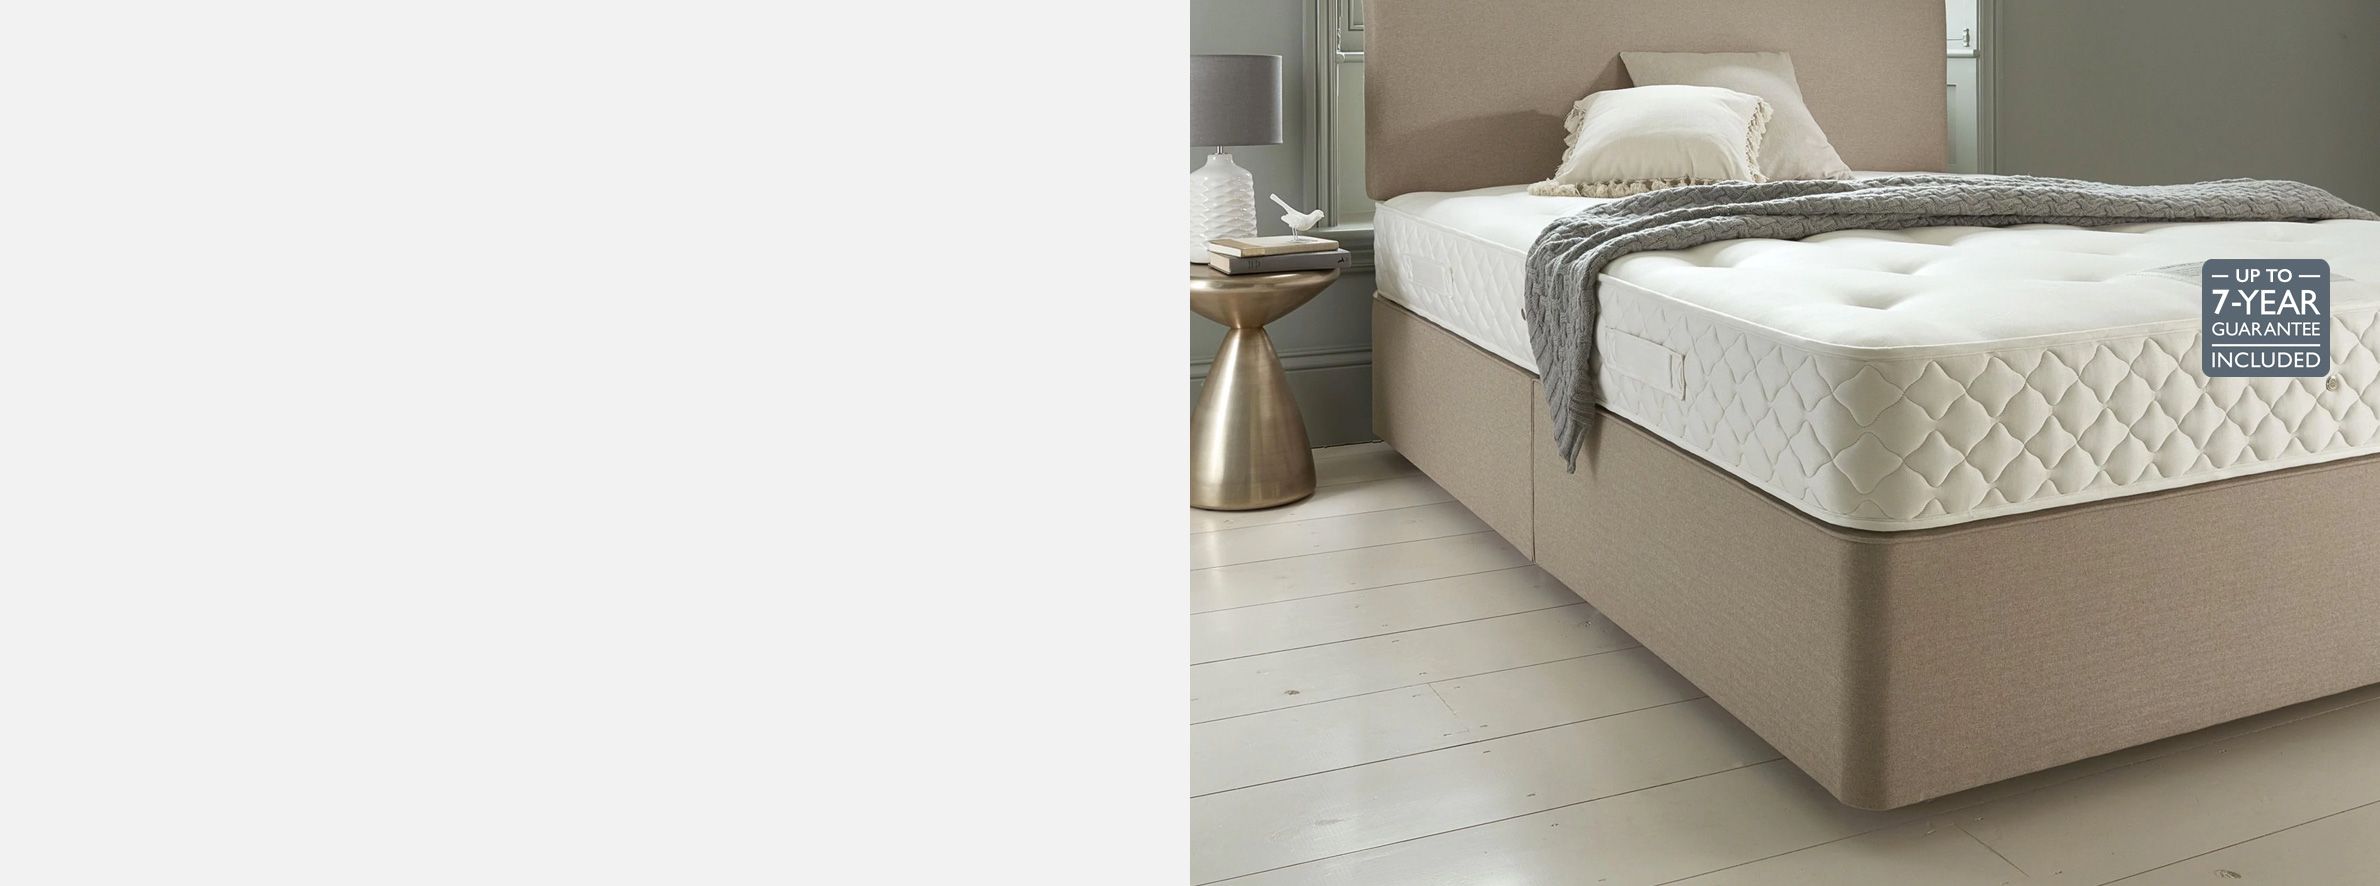 john lewis double beds and mattresses